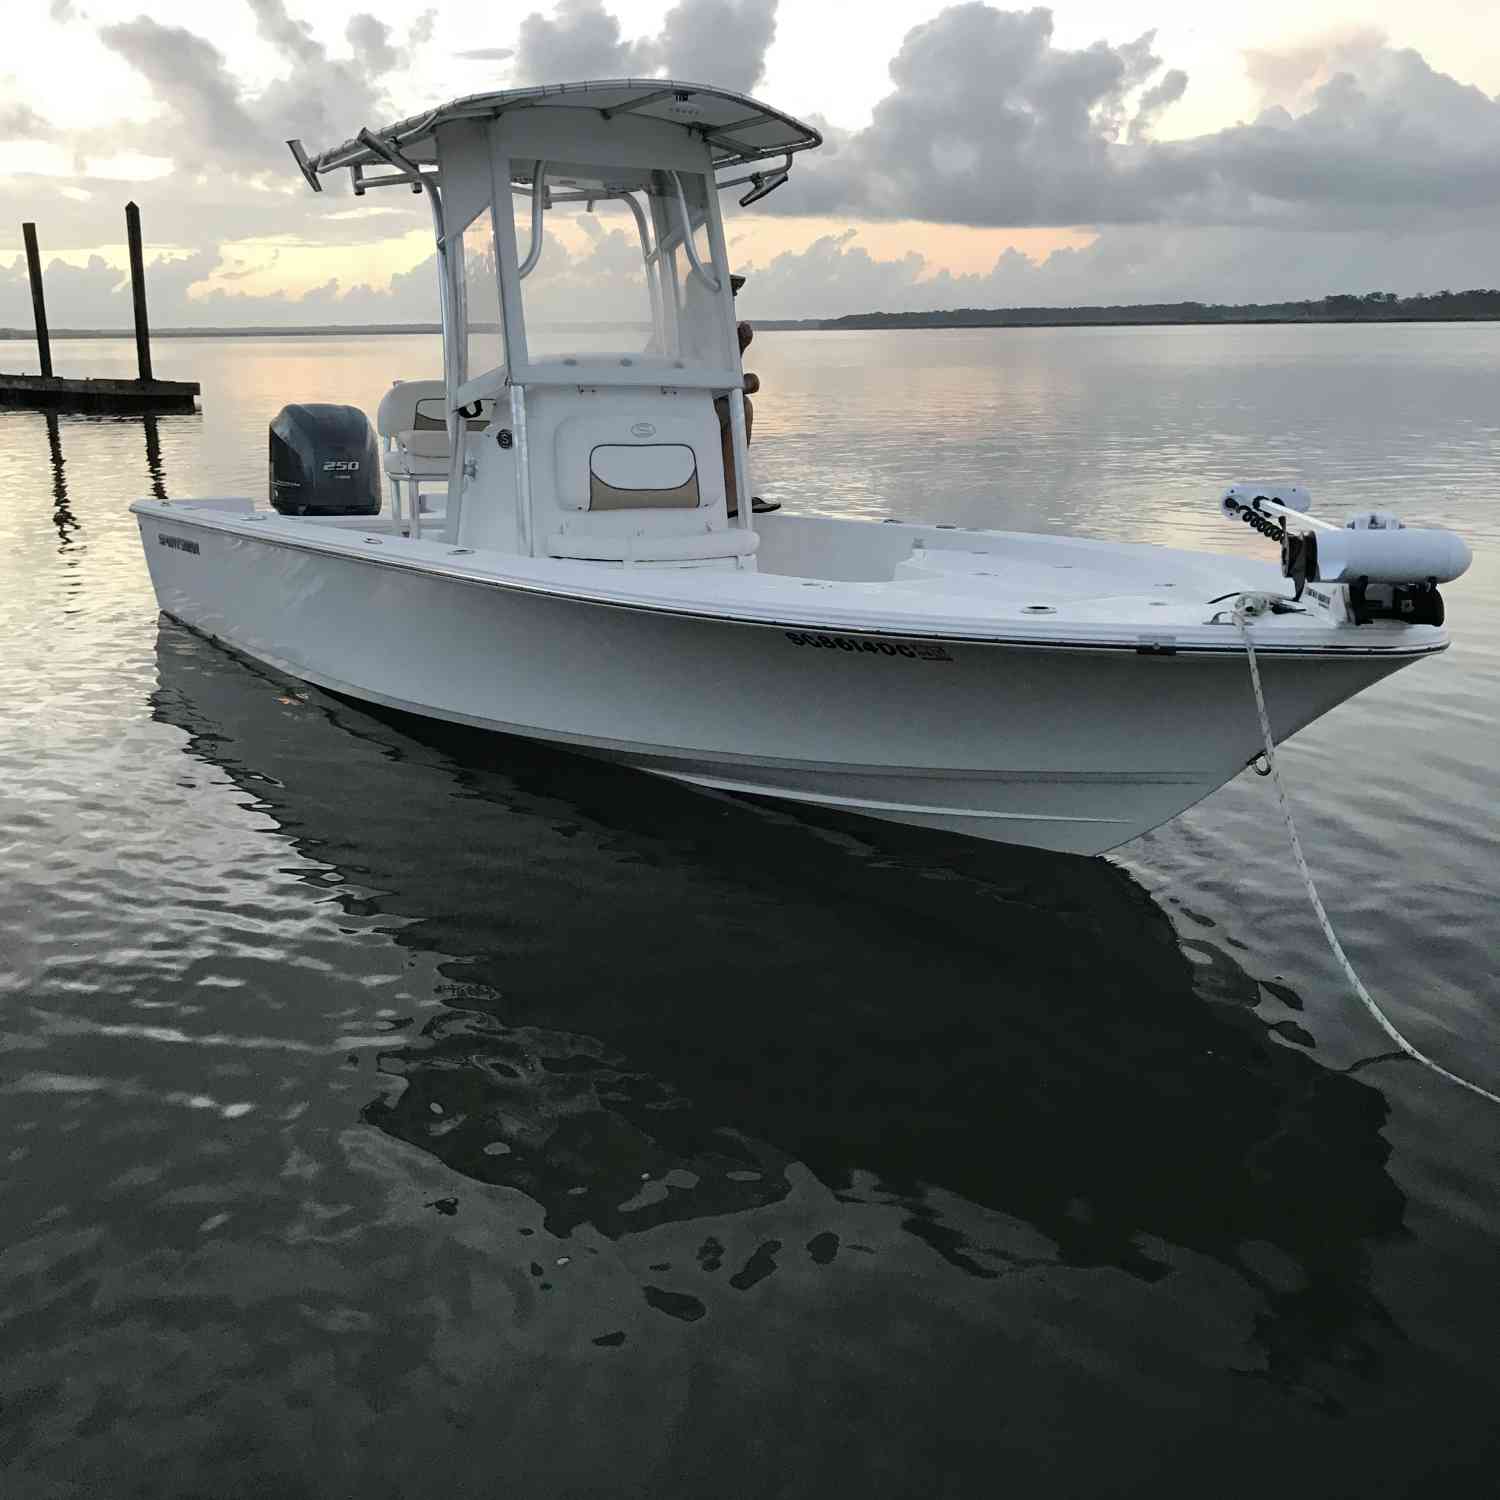 This photo was taken on the morning of sea trial that I purchased this 247 in Bluffton, SC. Needless to...